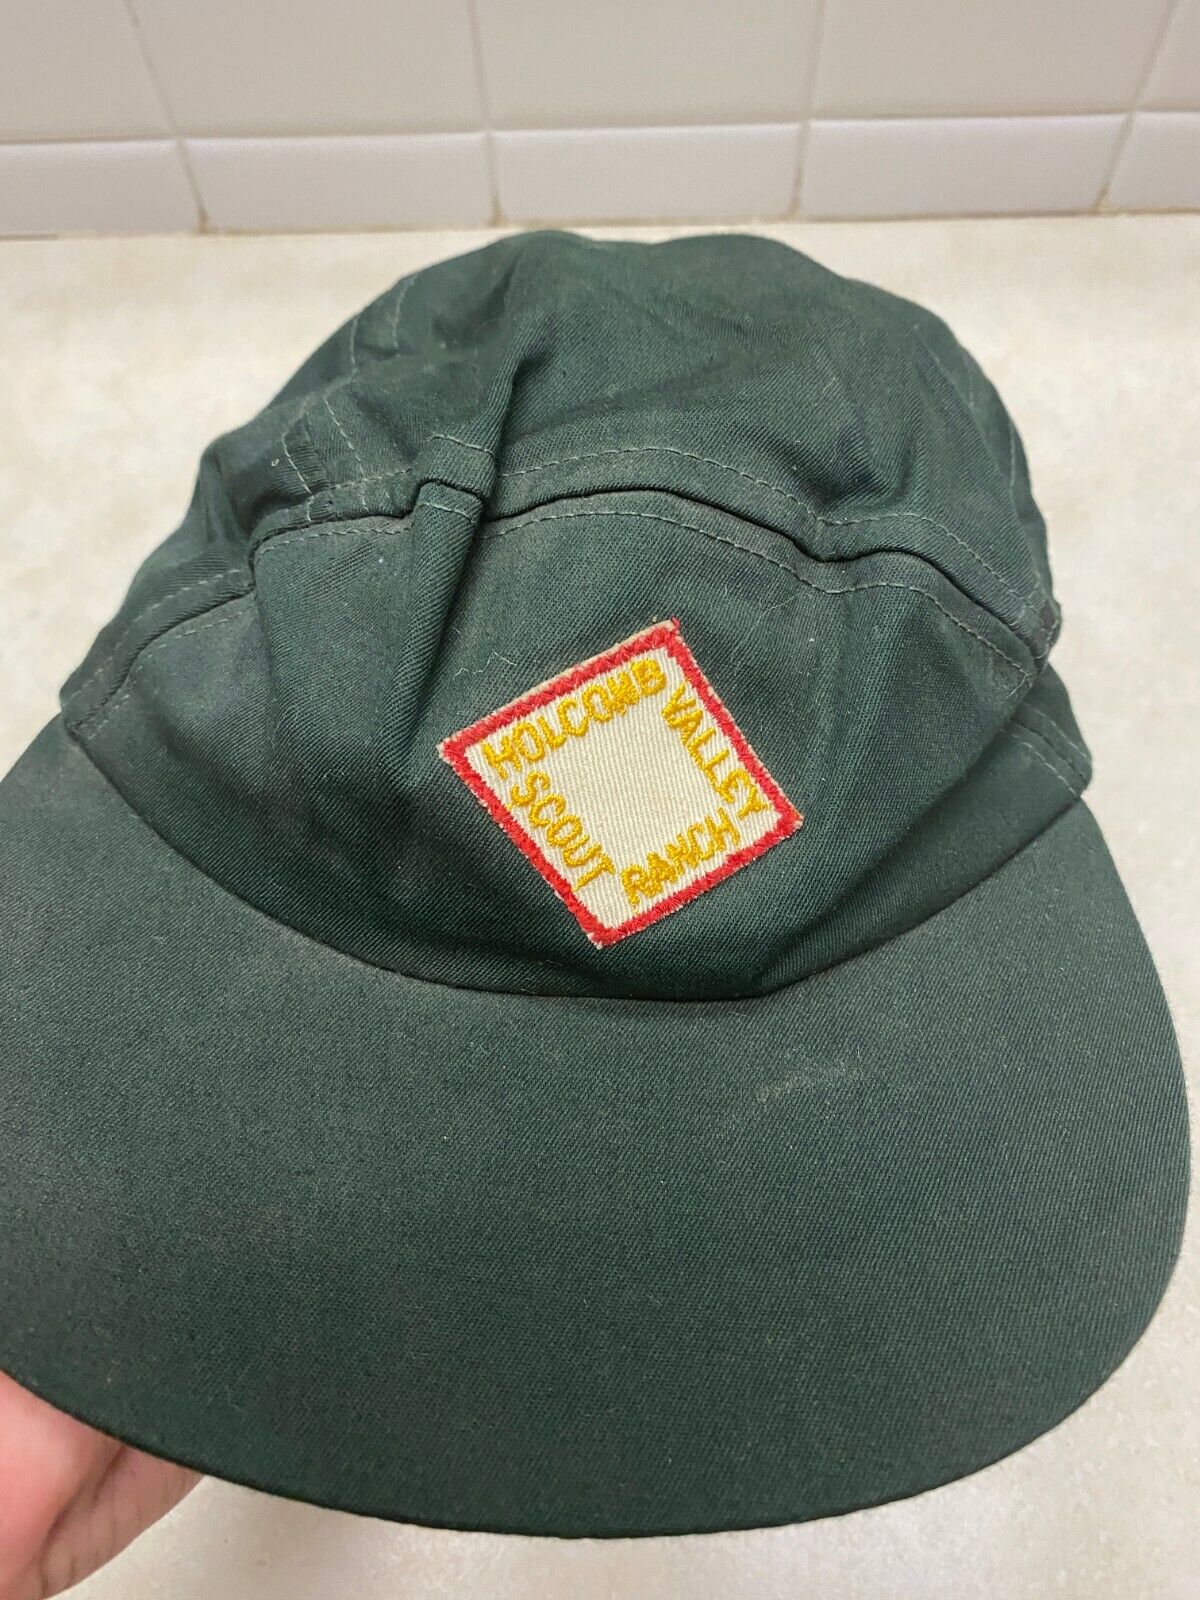 Holcomb Valley Scout Ranch Diamond on Hat